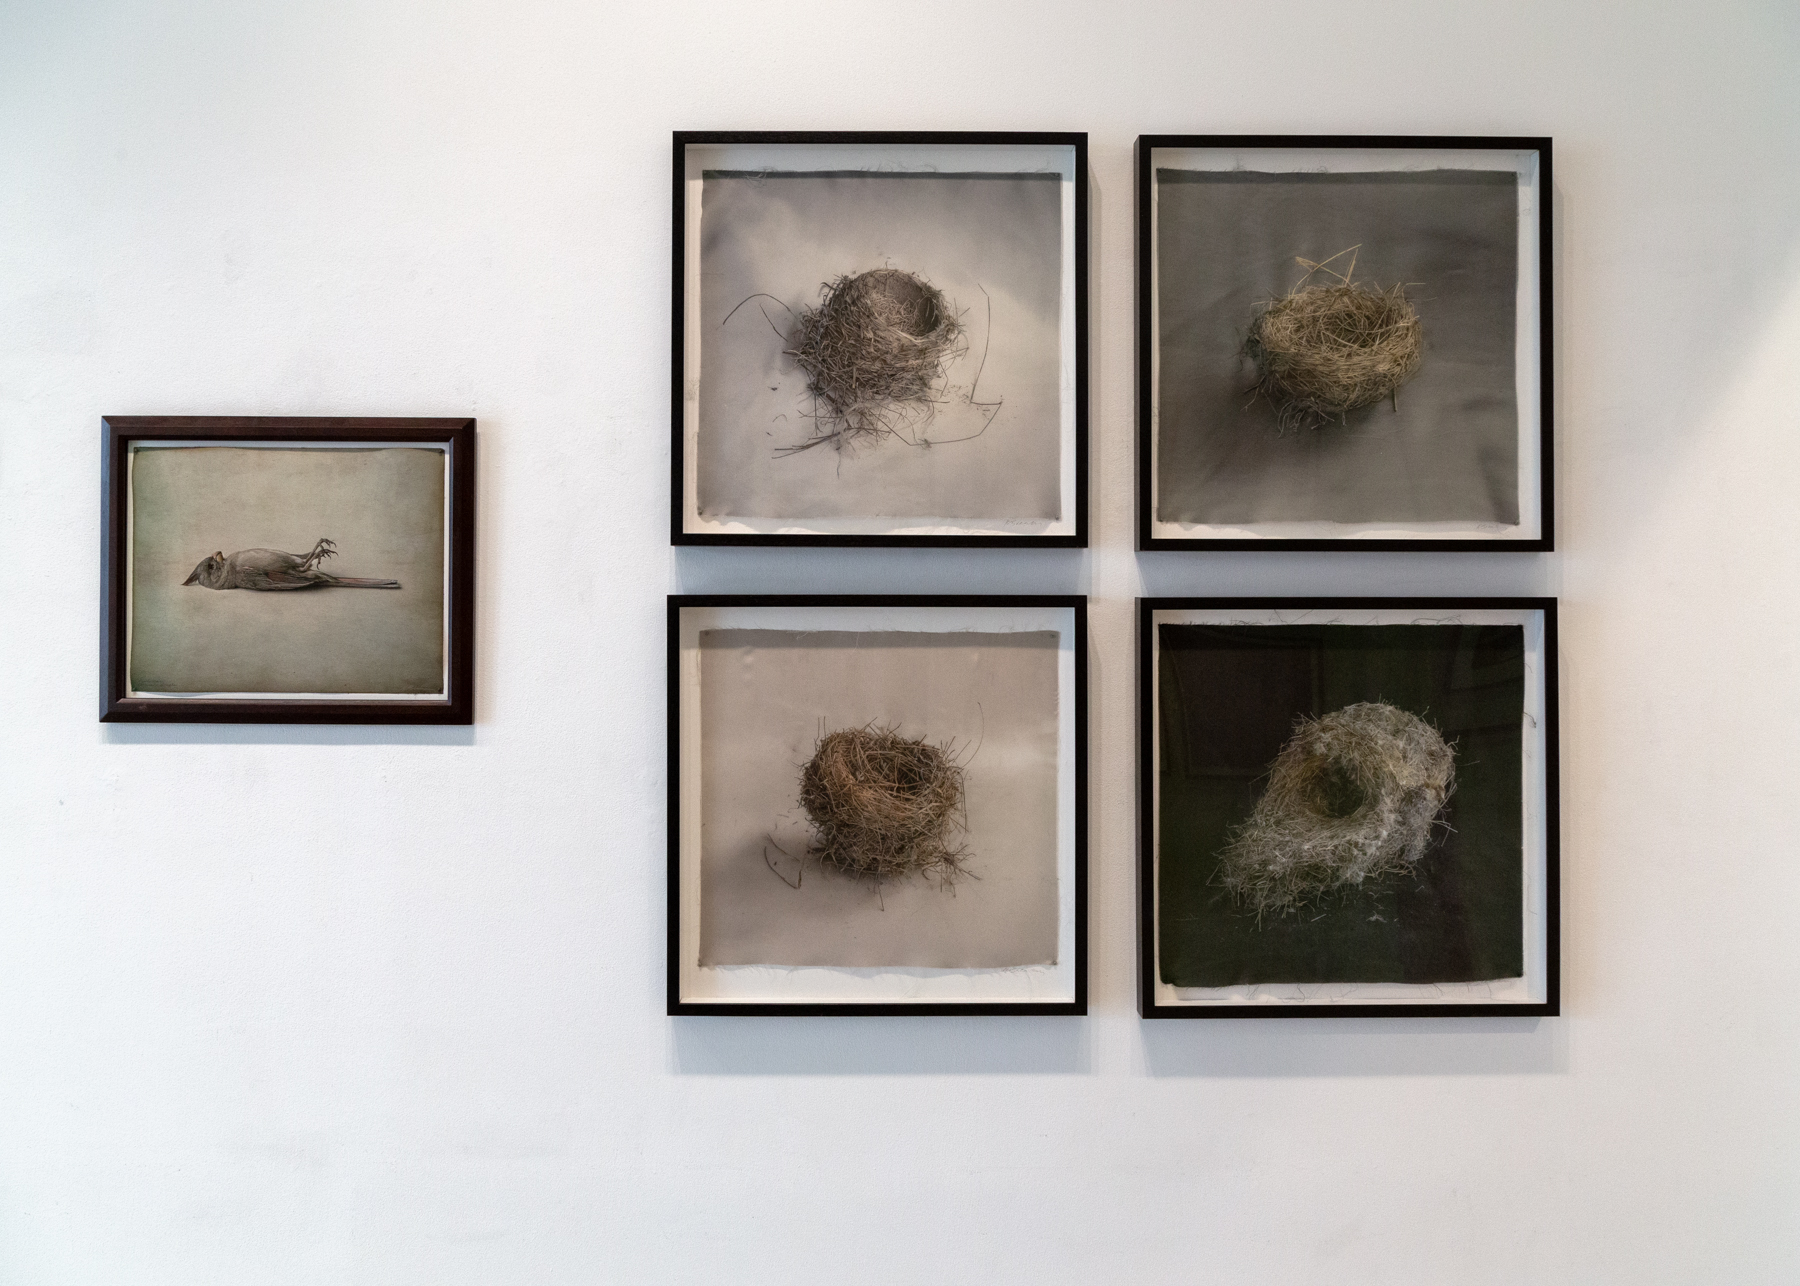 Kate Breakey, Avian, Catherine Couturier Gallery, Houston, Texas, Installation photograph by Erica Lee